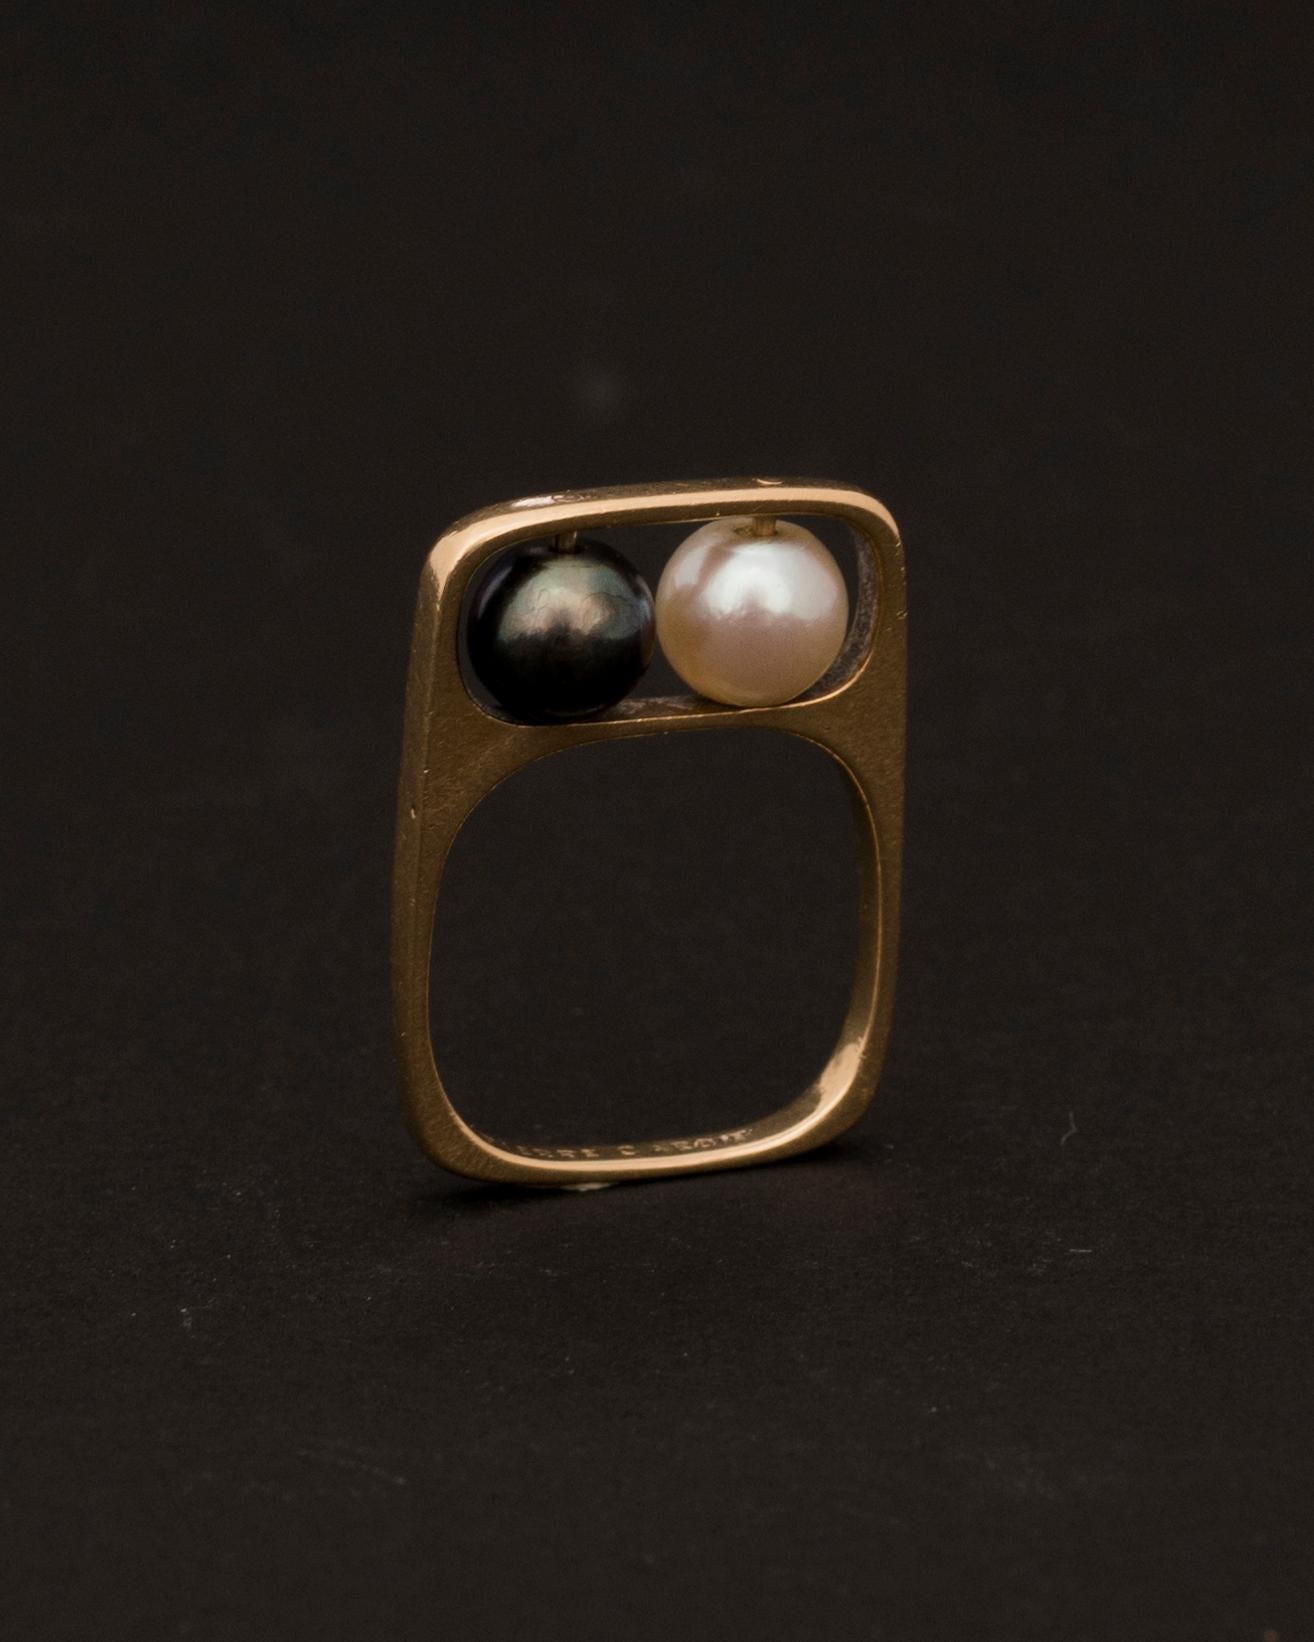 Express Shipping still available during Lockdown

Jean Dinh Van for Pierre Cardin
18K Gold and Cultured Pearls ring, 1966
Signed 